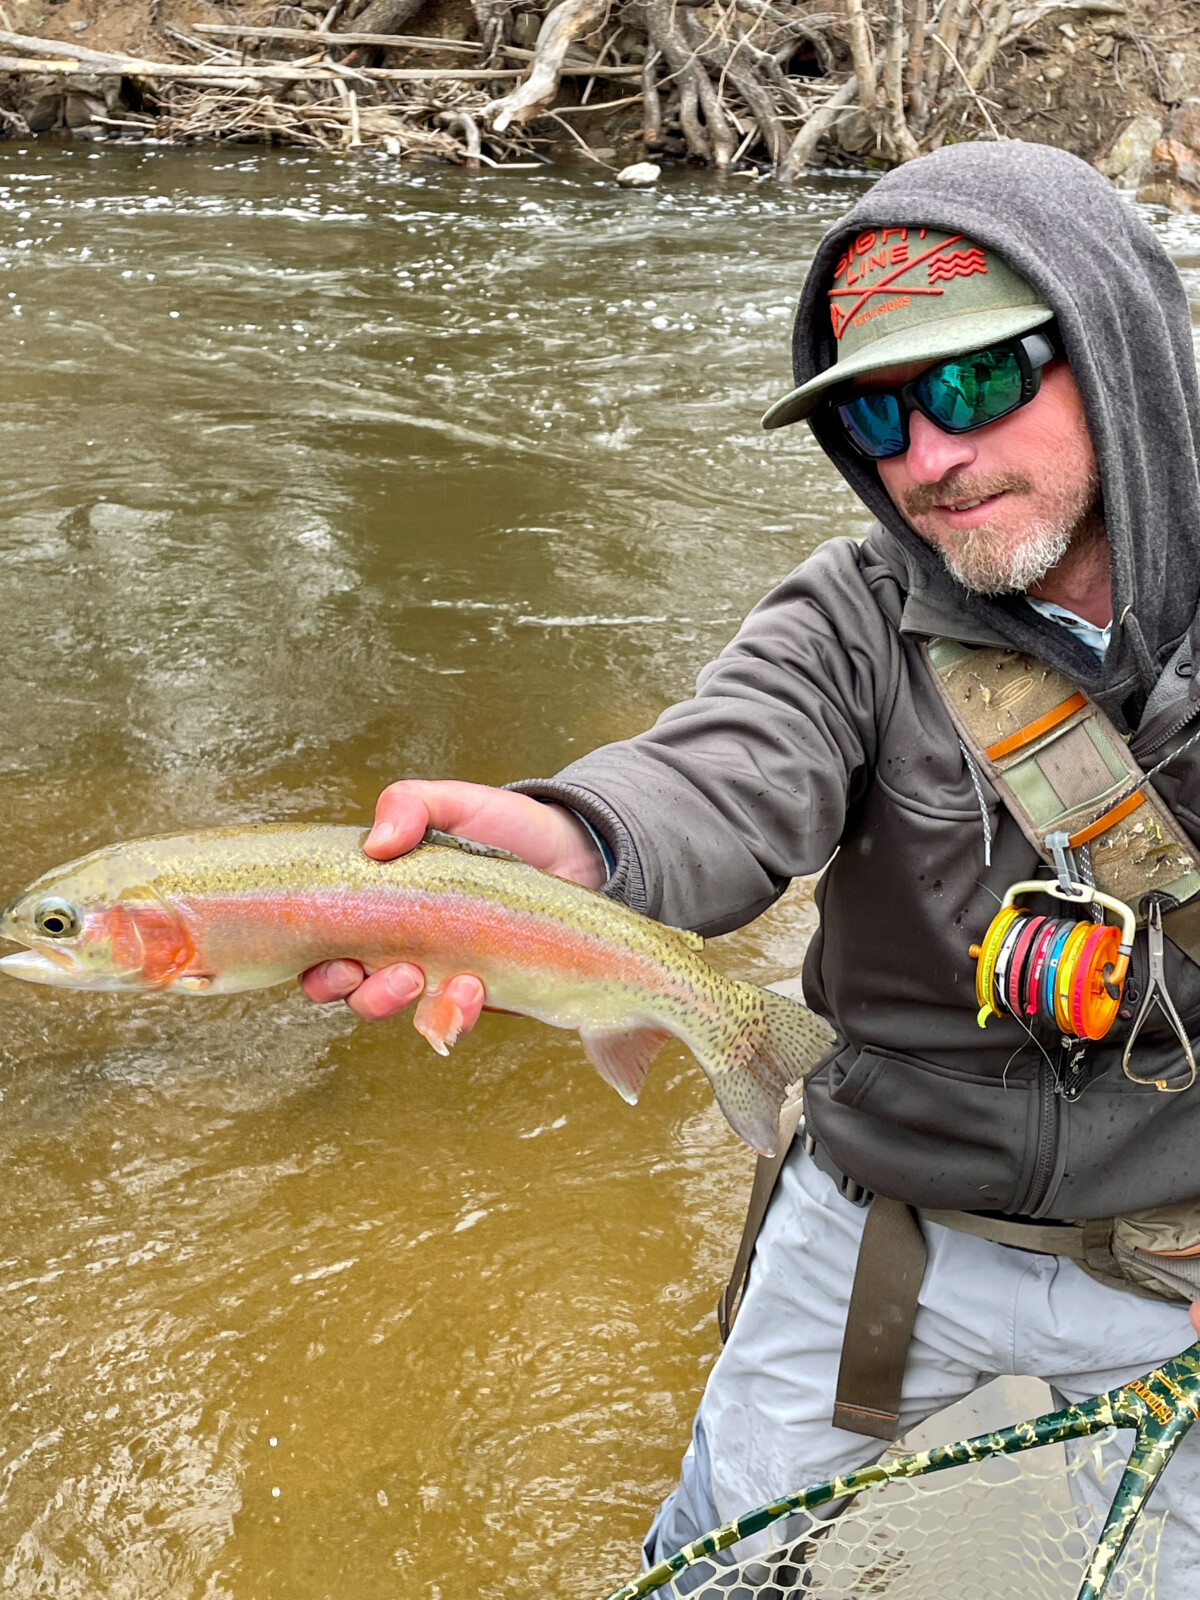 Fly fishing guide with a rainbow trout